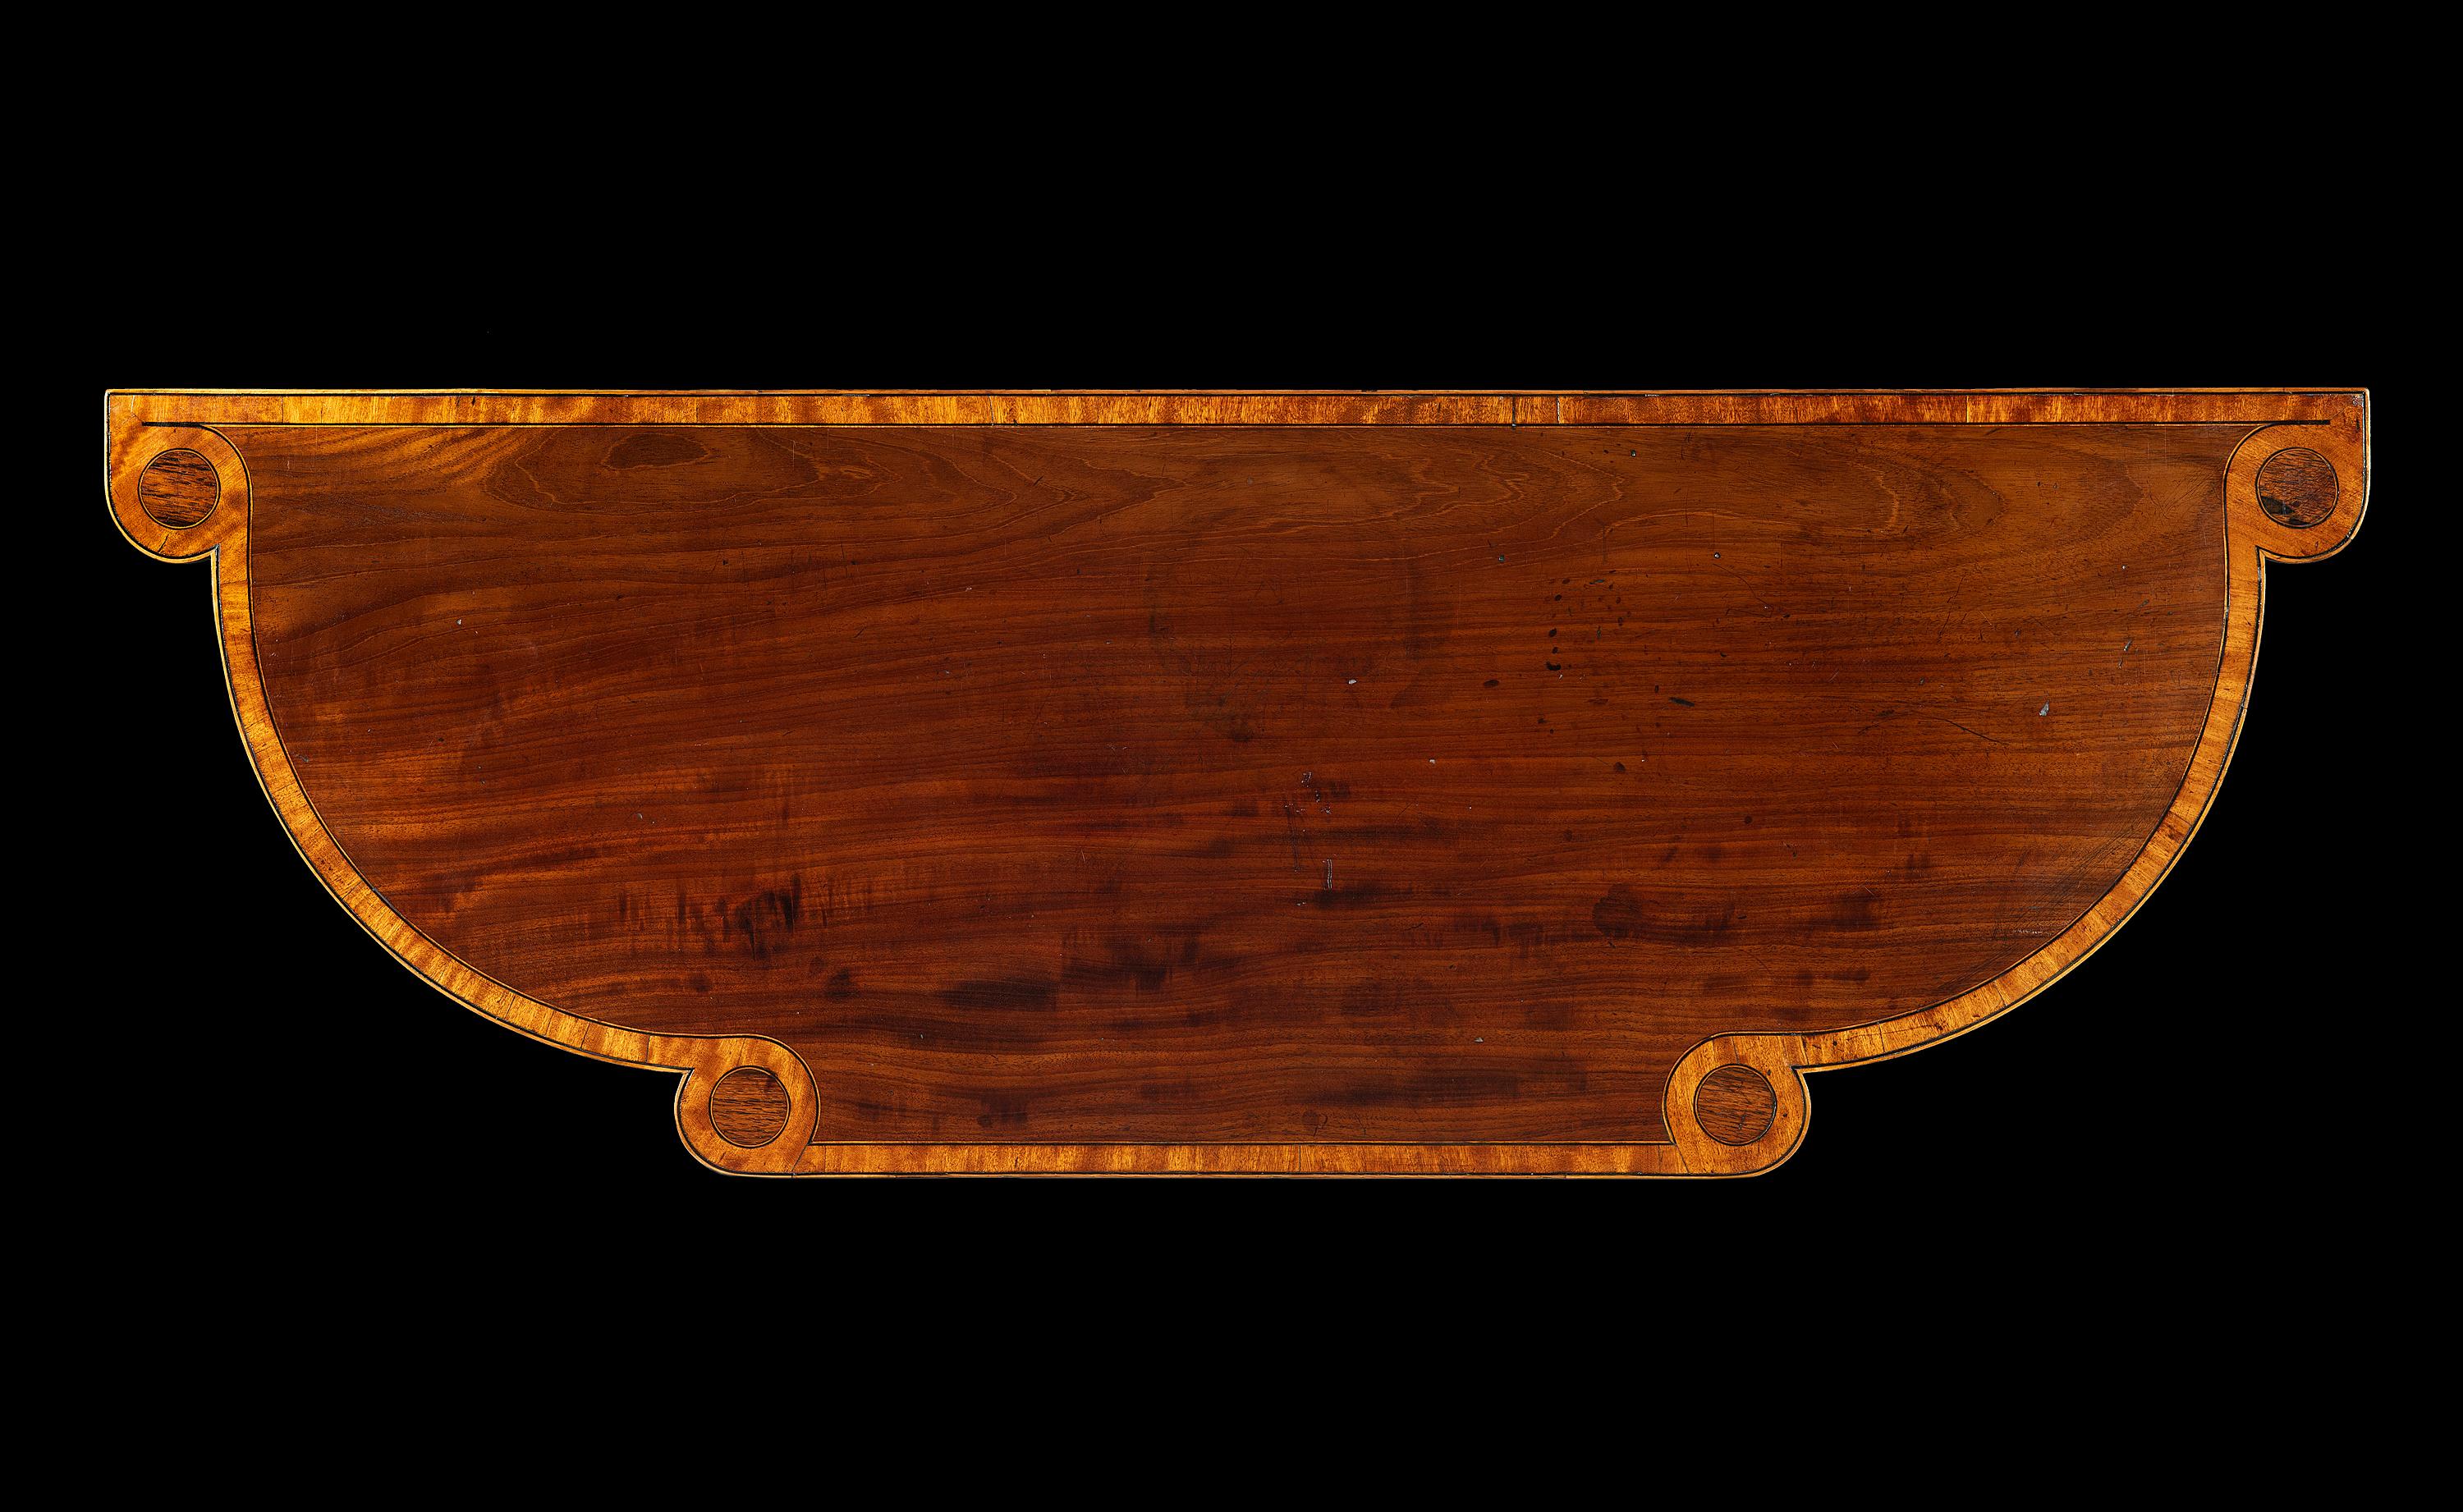 George III 18th Century Period Mahogany & Rosewood Crossbanded Demilune Pier Table